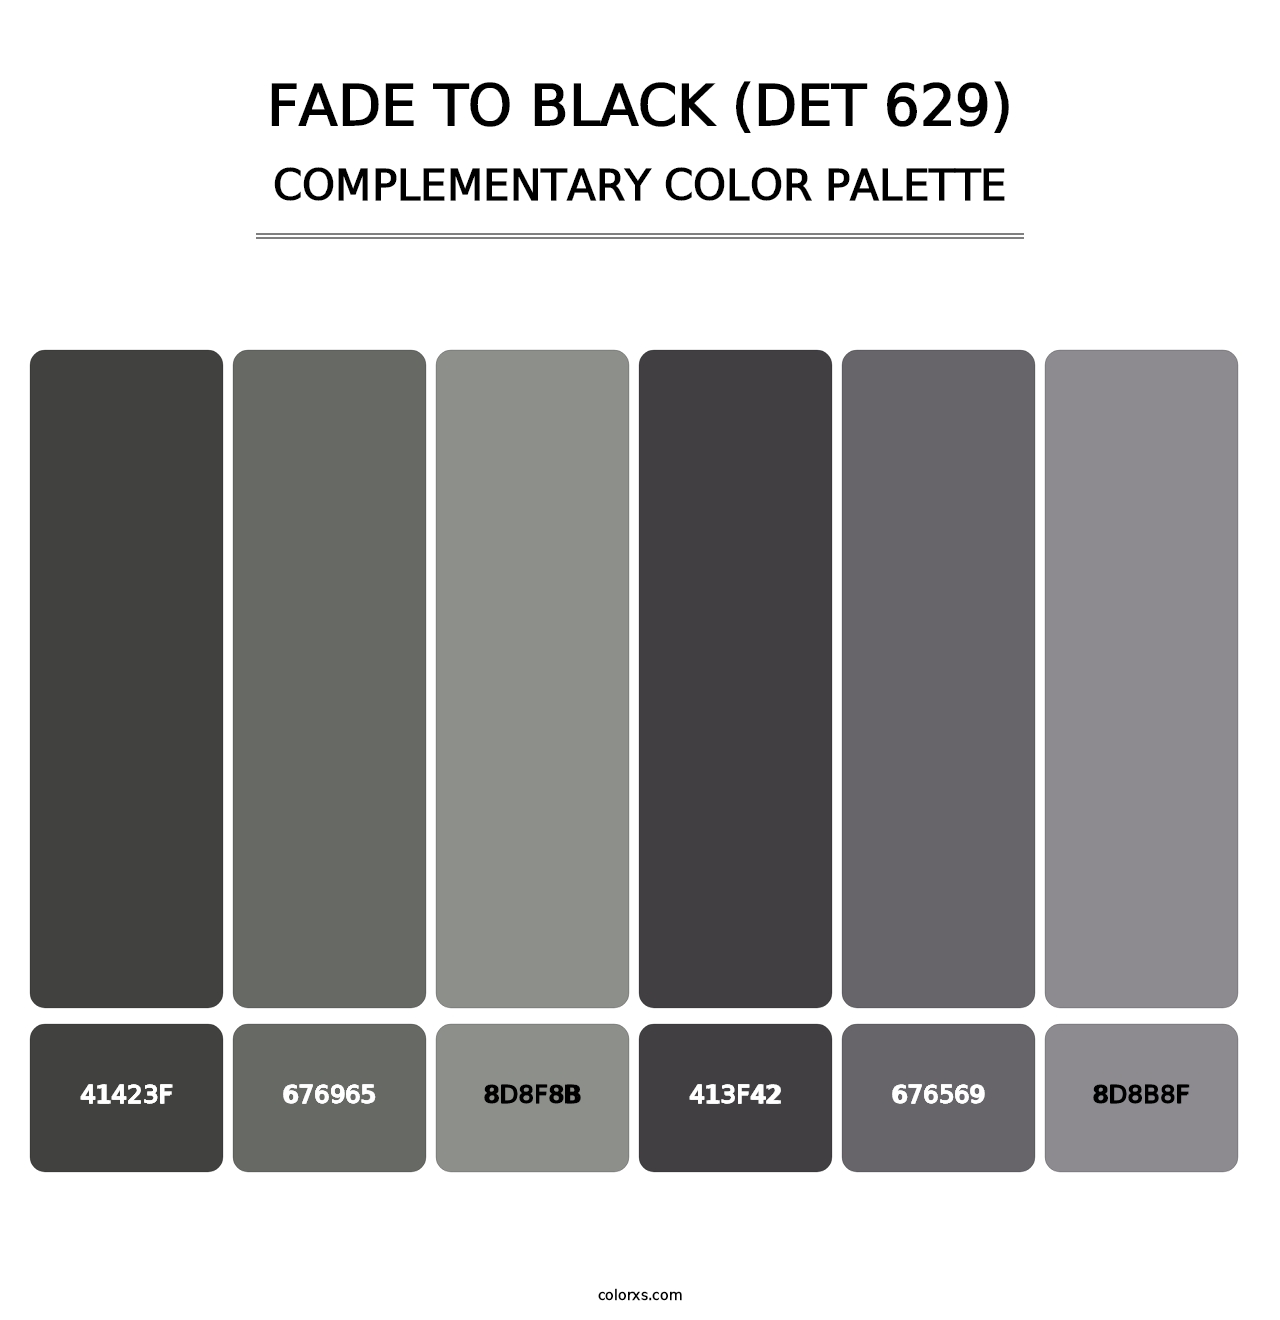 Fade to Black (DET 629) - Complementary Color Palette